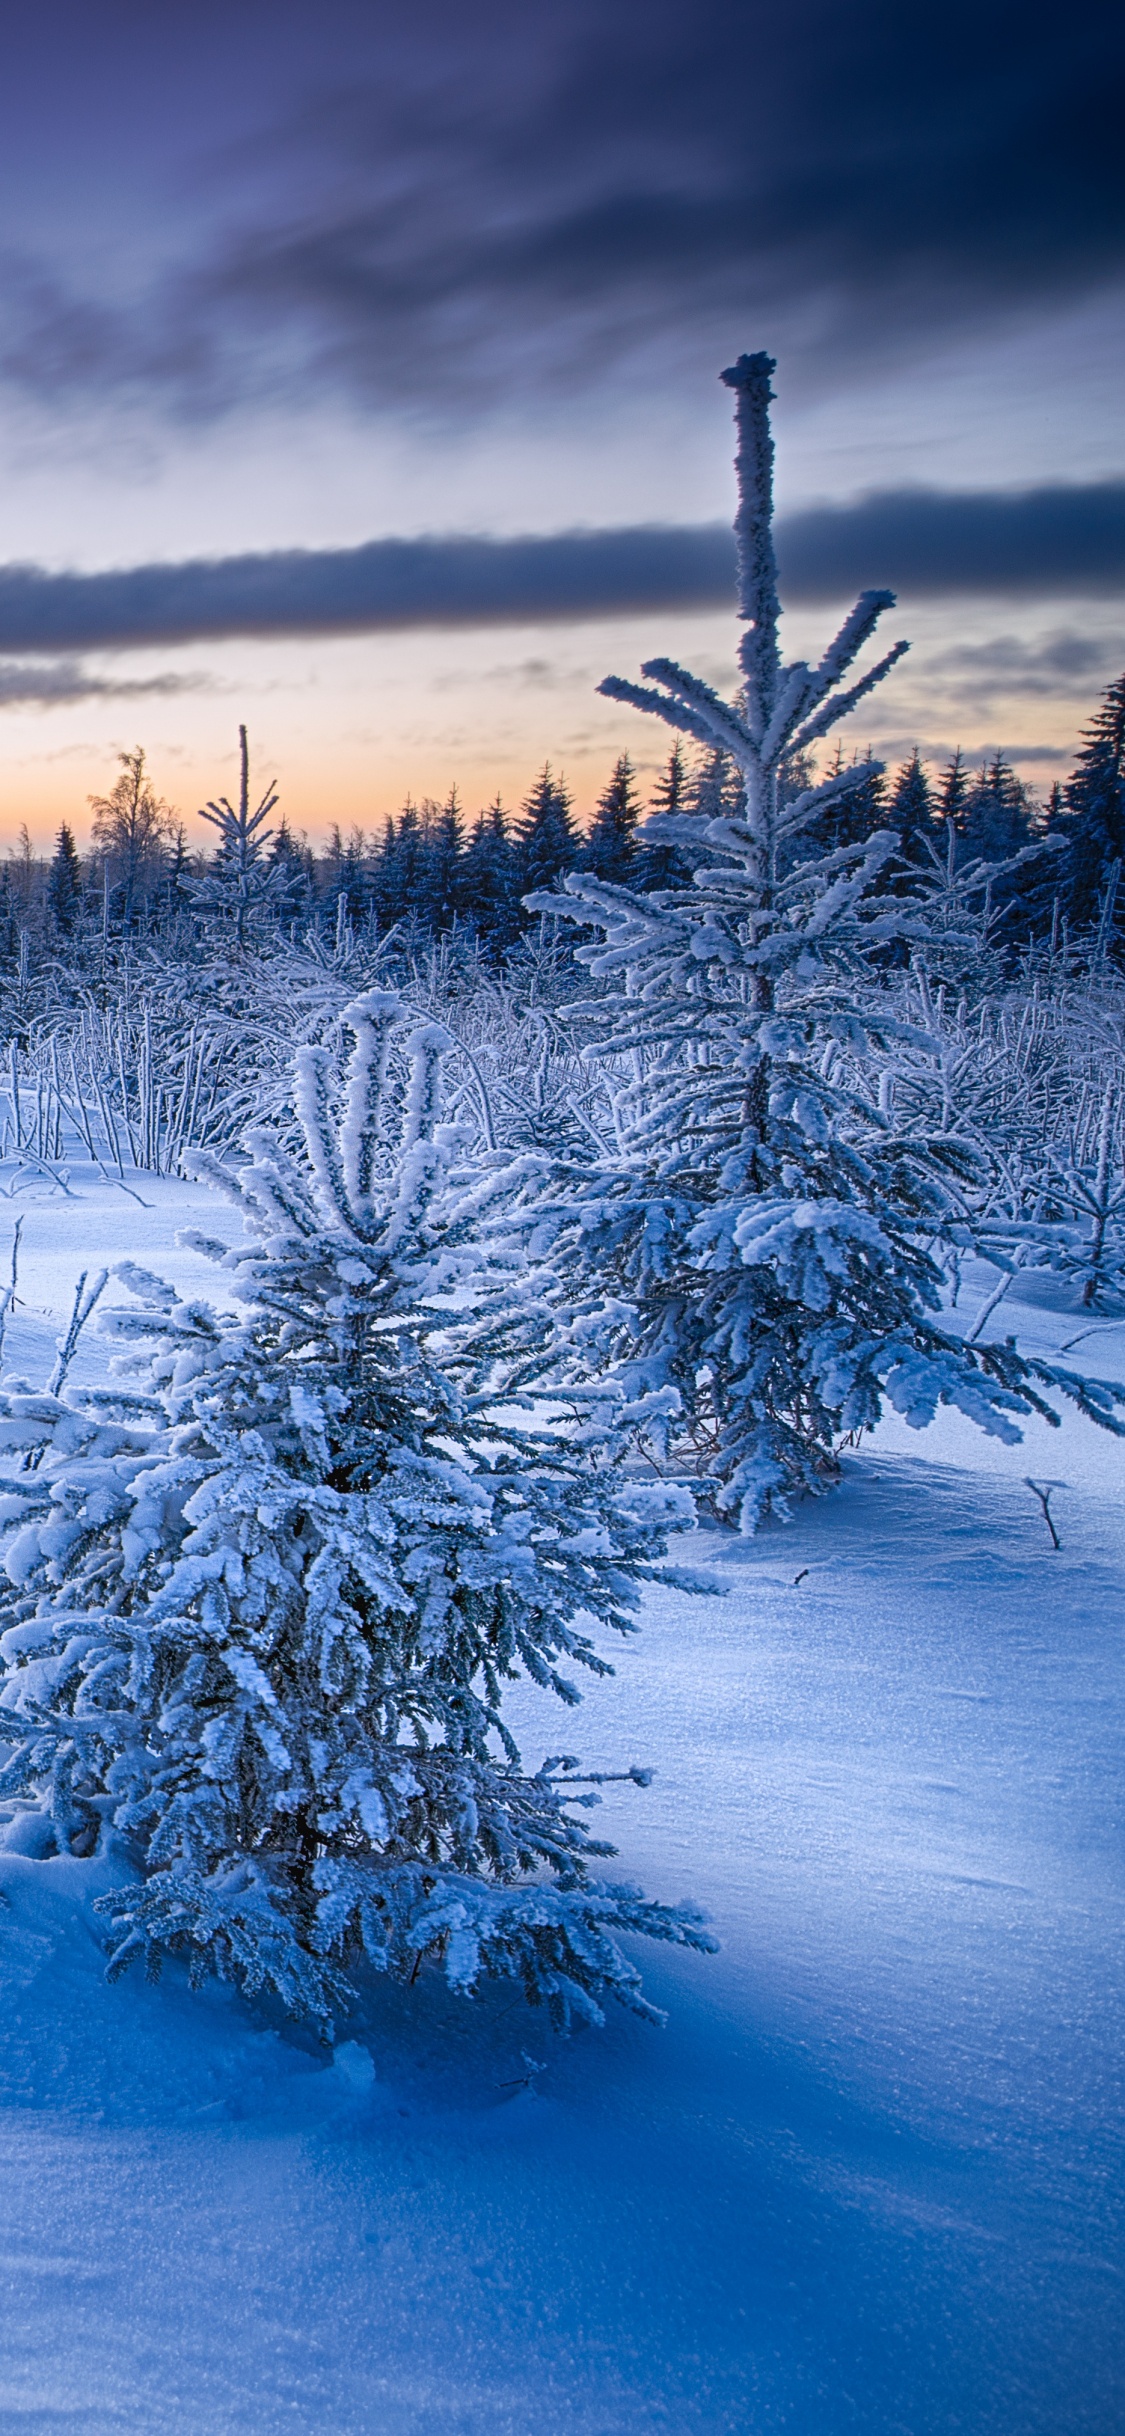 Snow Covered Field and Trees During Daytime. Wallpaper in 1125x2436 Resolution